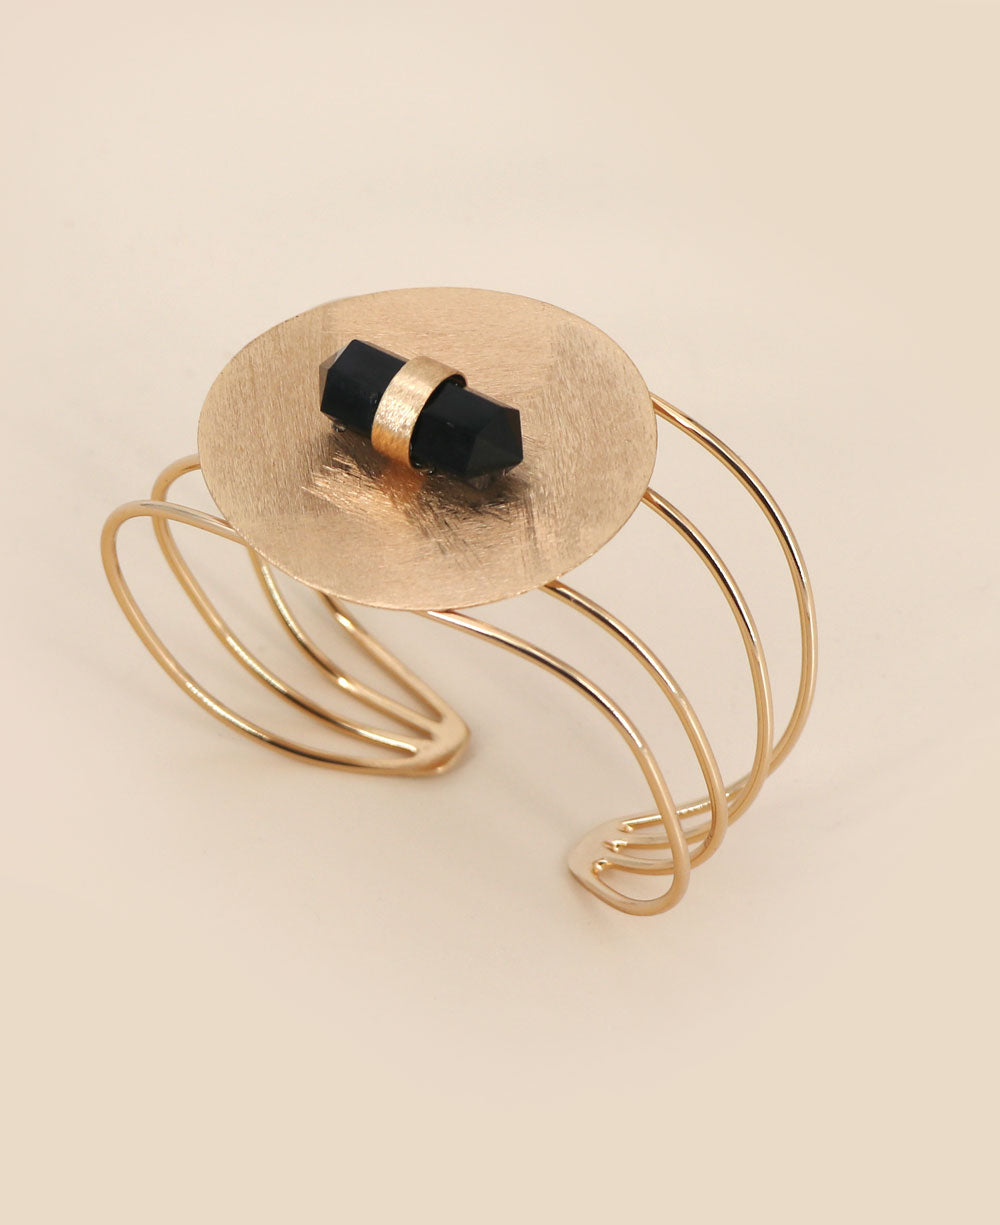 Rose Gold Plated Brass Adjustable Wire Cuff Bracelet featuring a central Black Onyx Point.